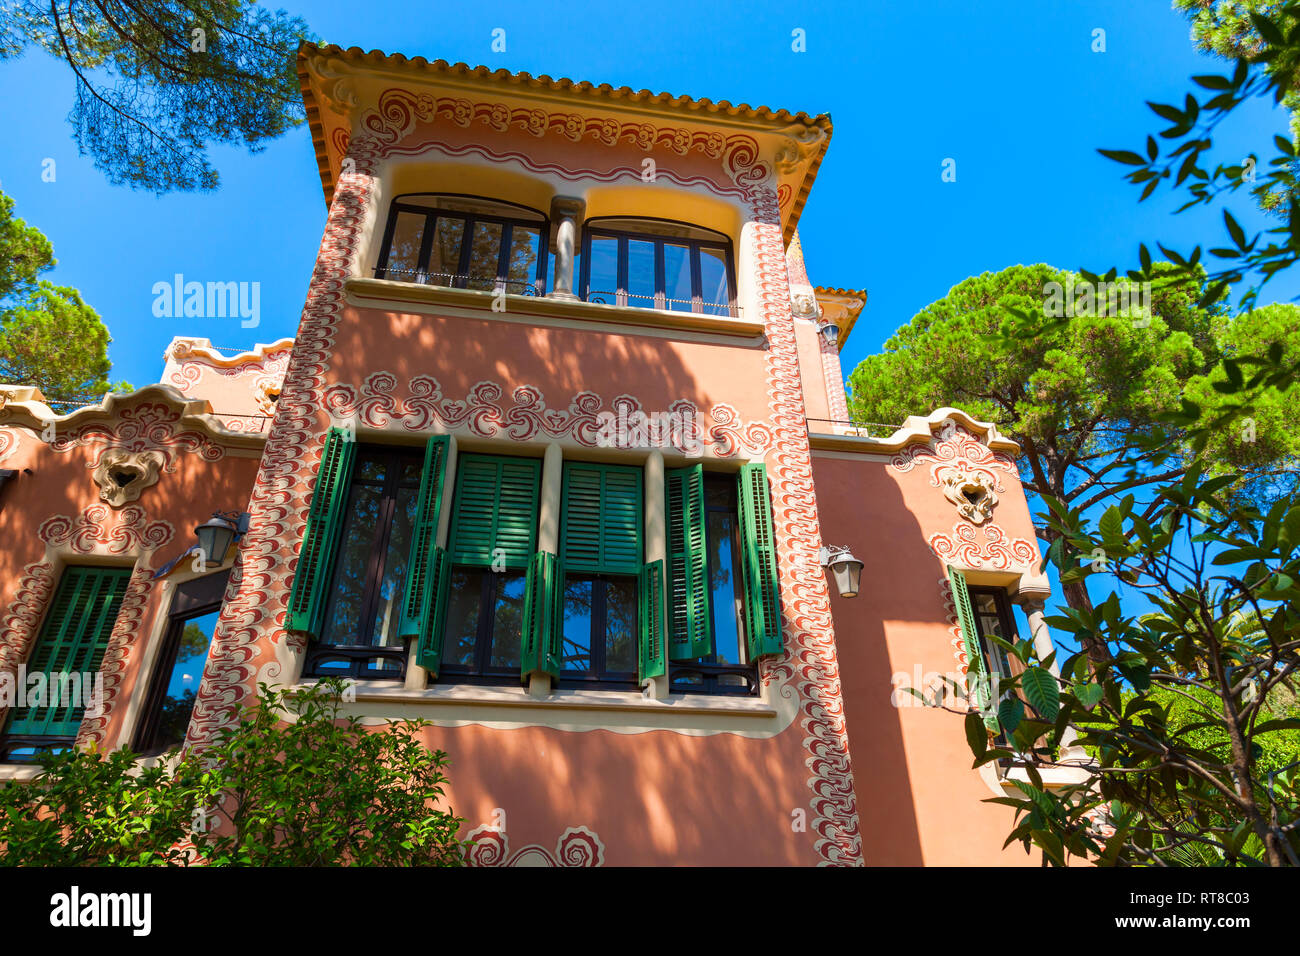 Barcelona, Spain - August 26, 2014: Gaudi House Museum at summer day Stock Photo